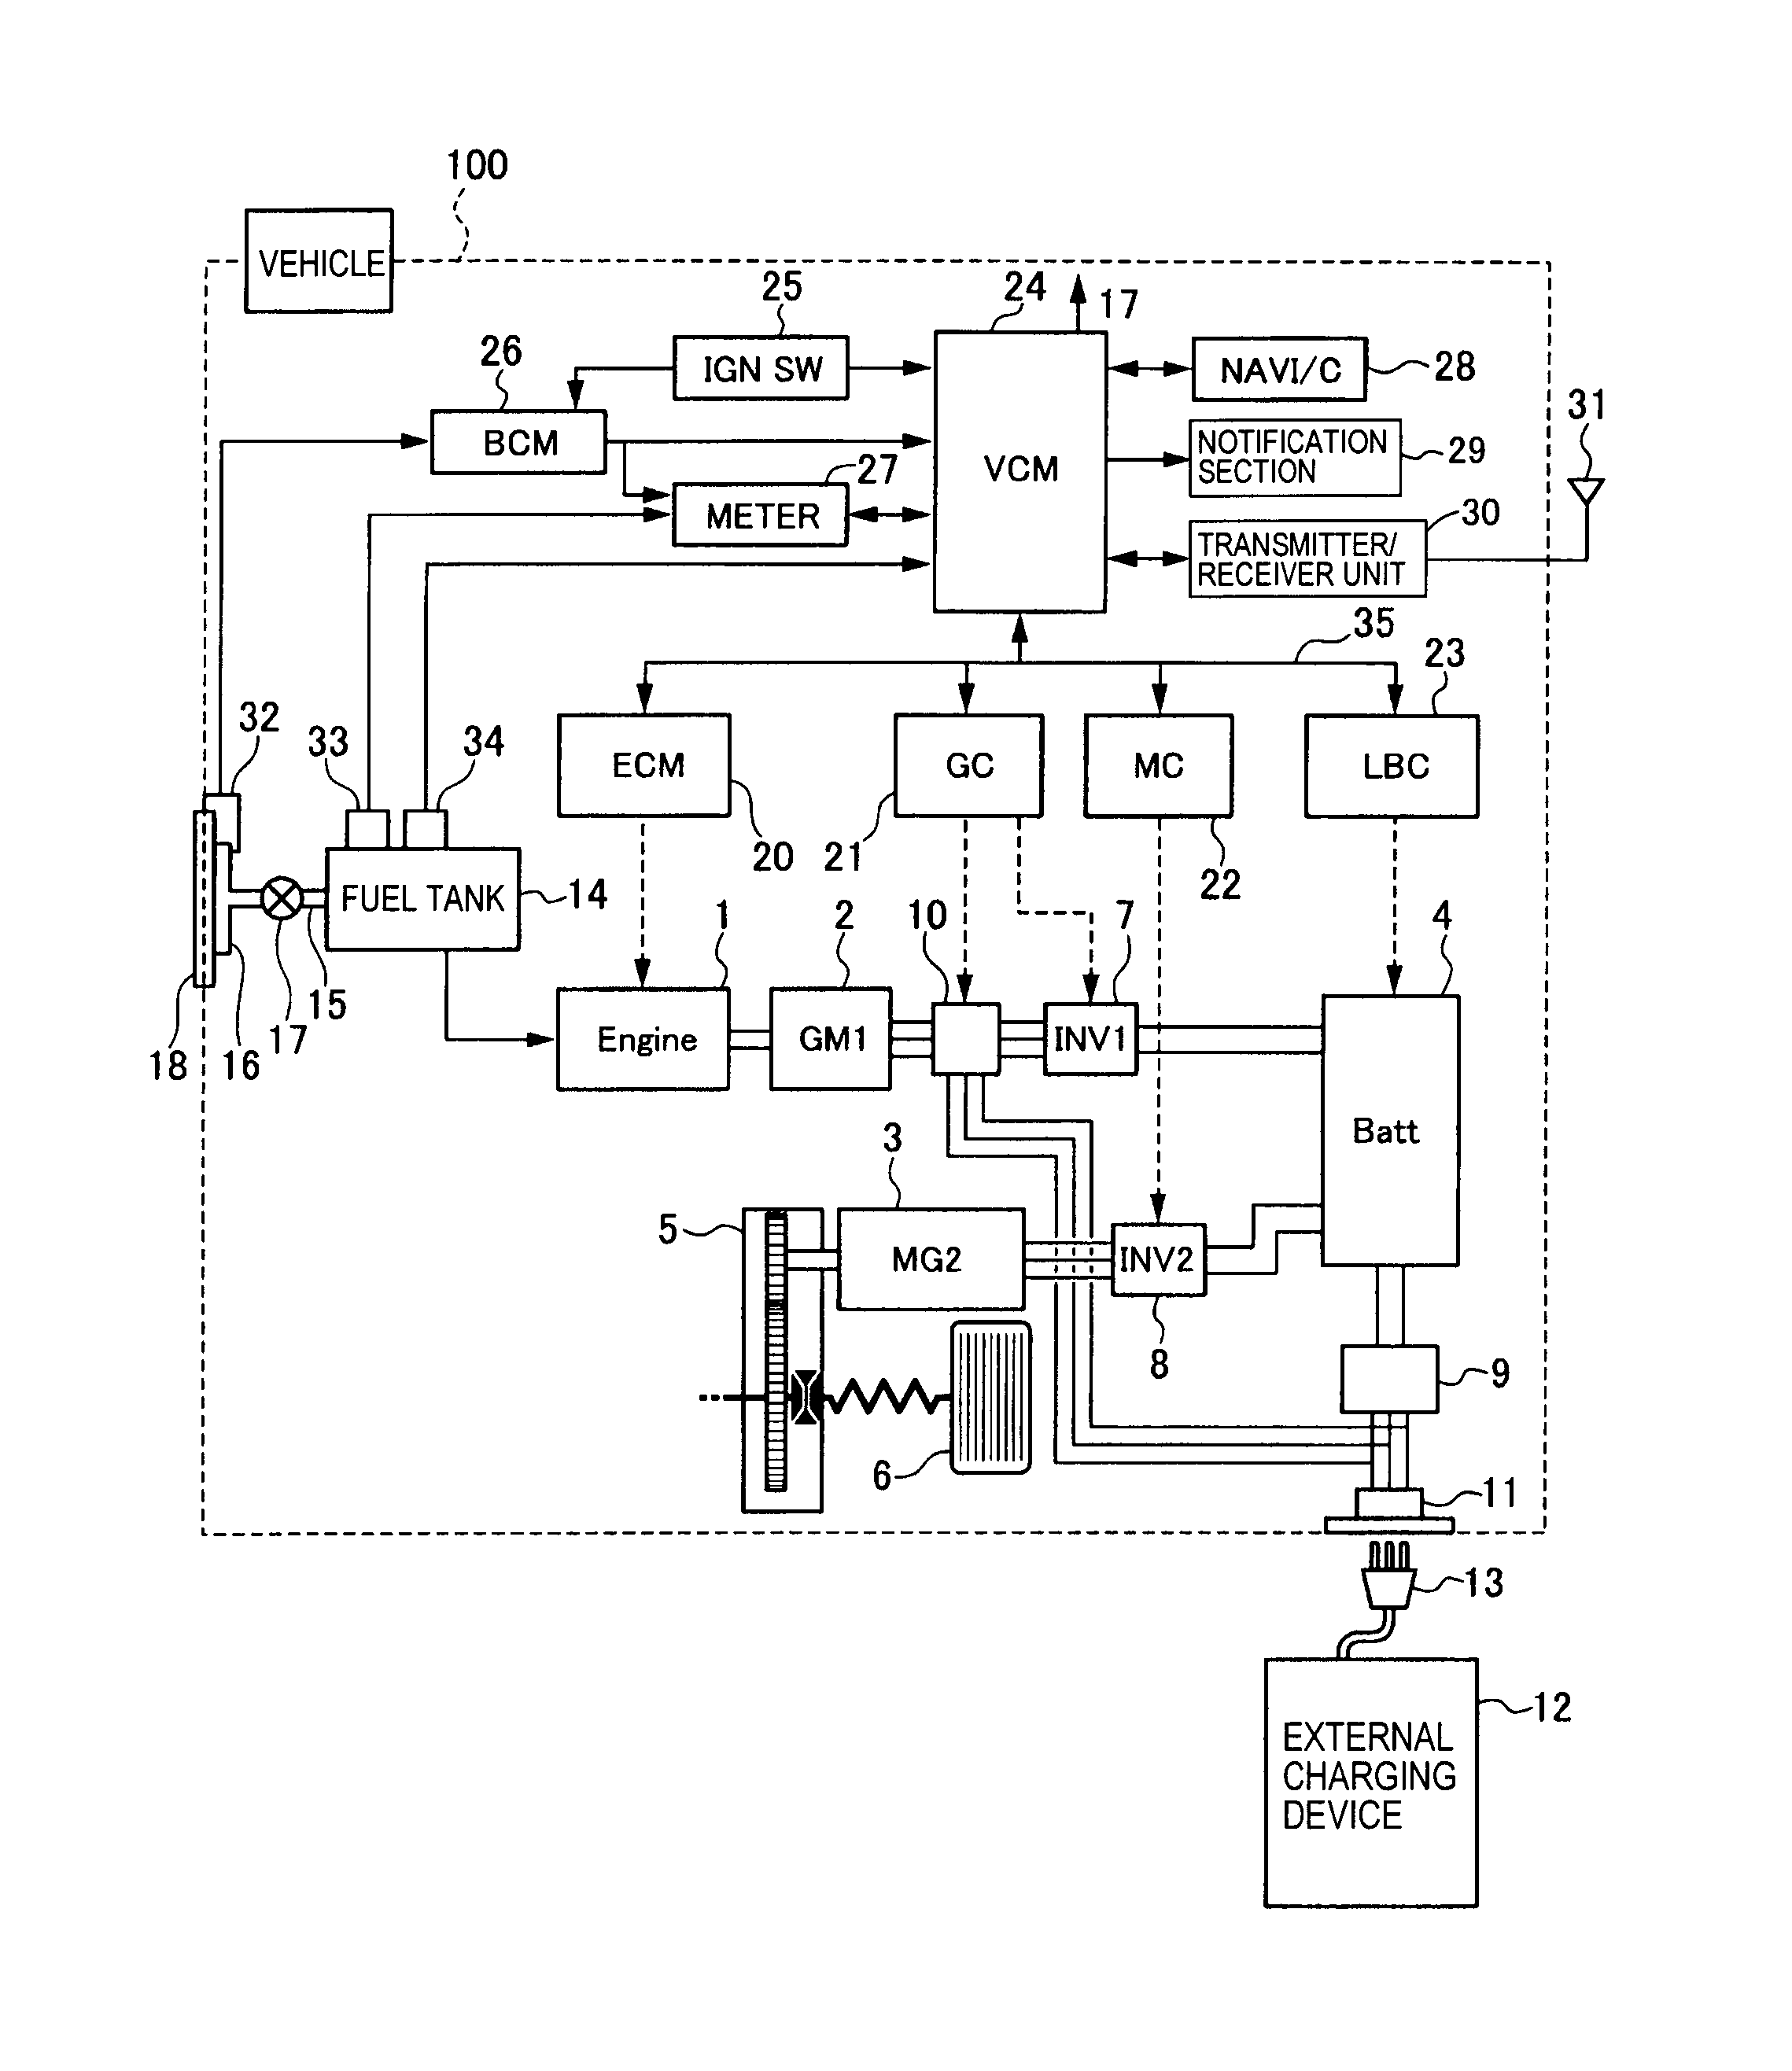 wiring diagram for a swamp cooler